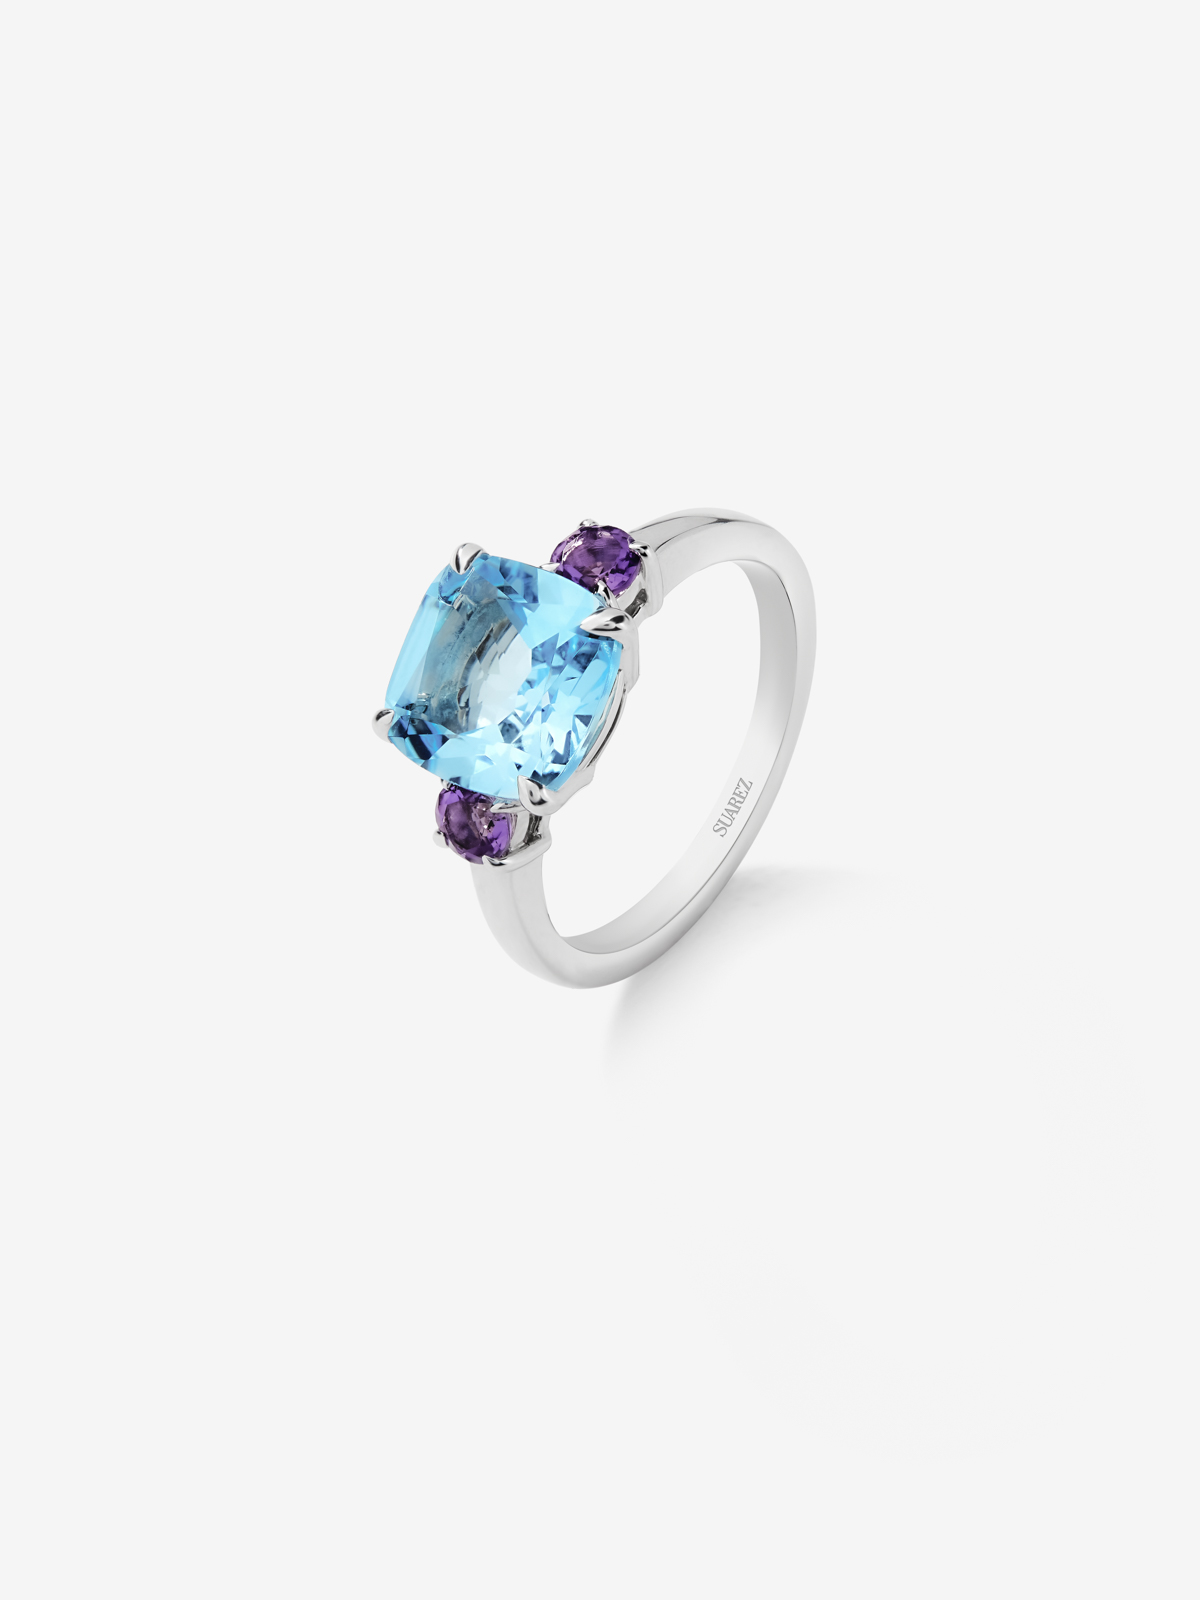 Triplet ring made of 925 silver with topaz and amethyst